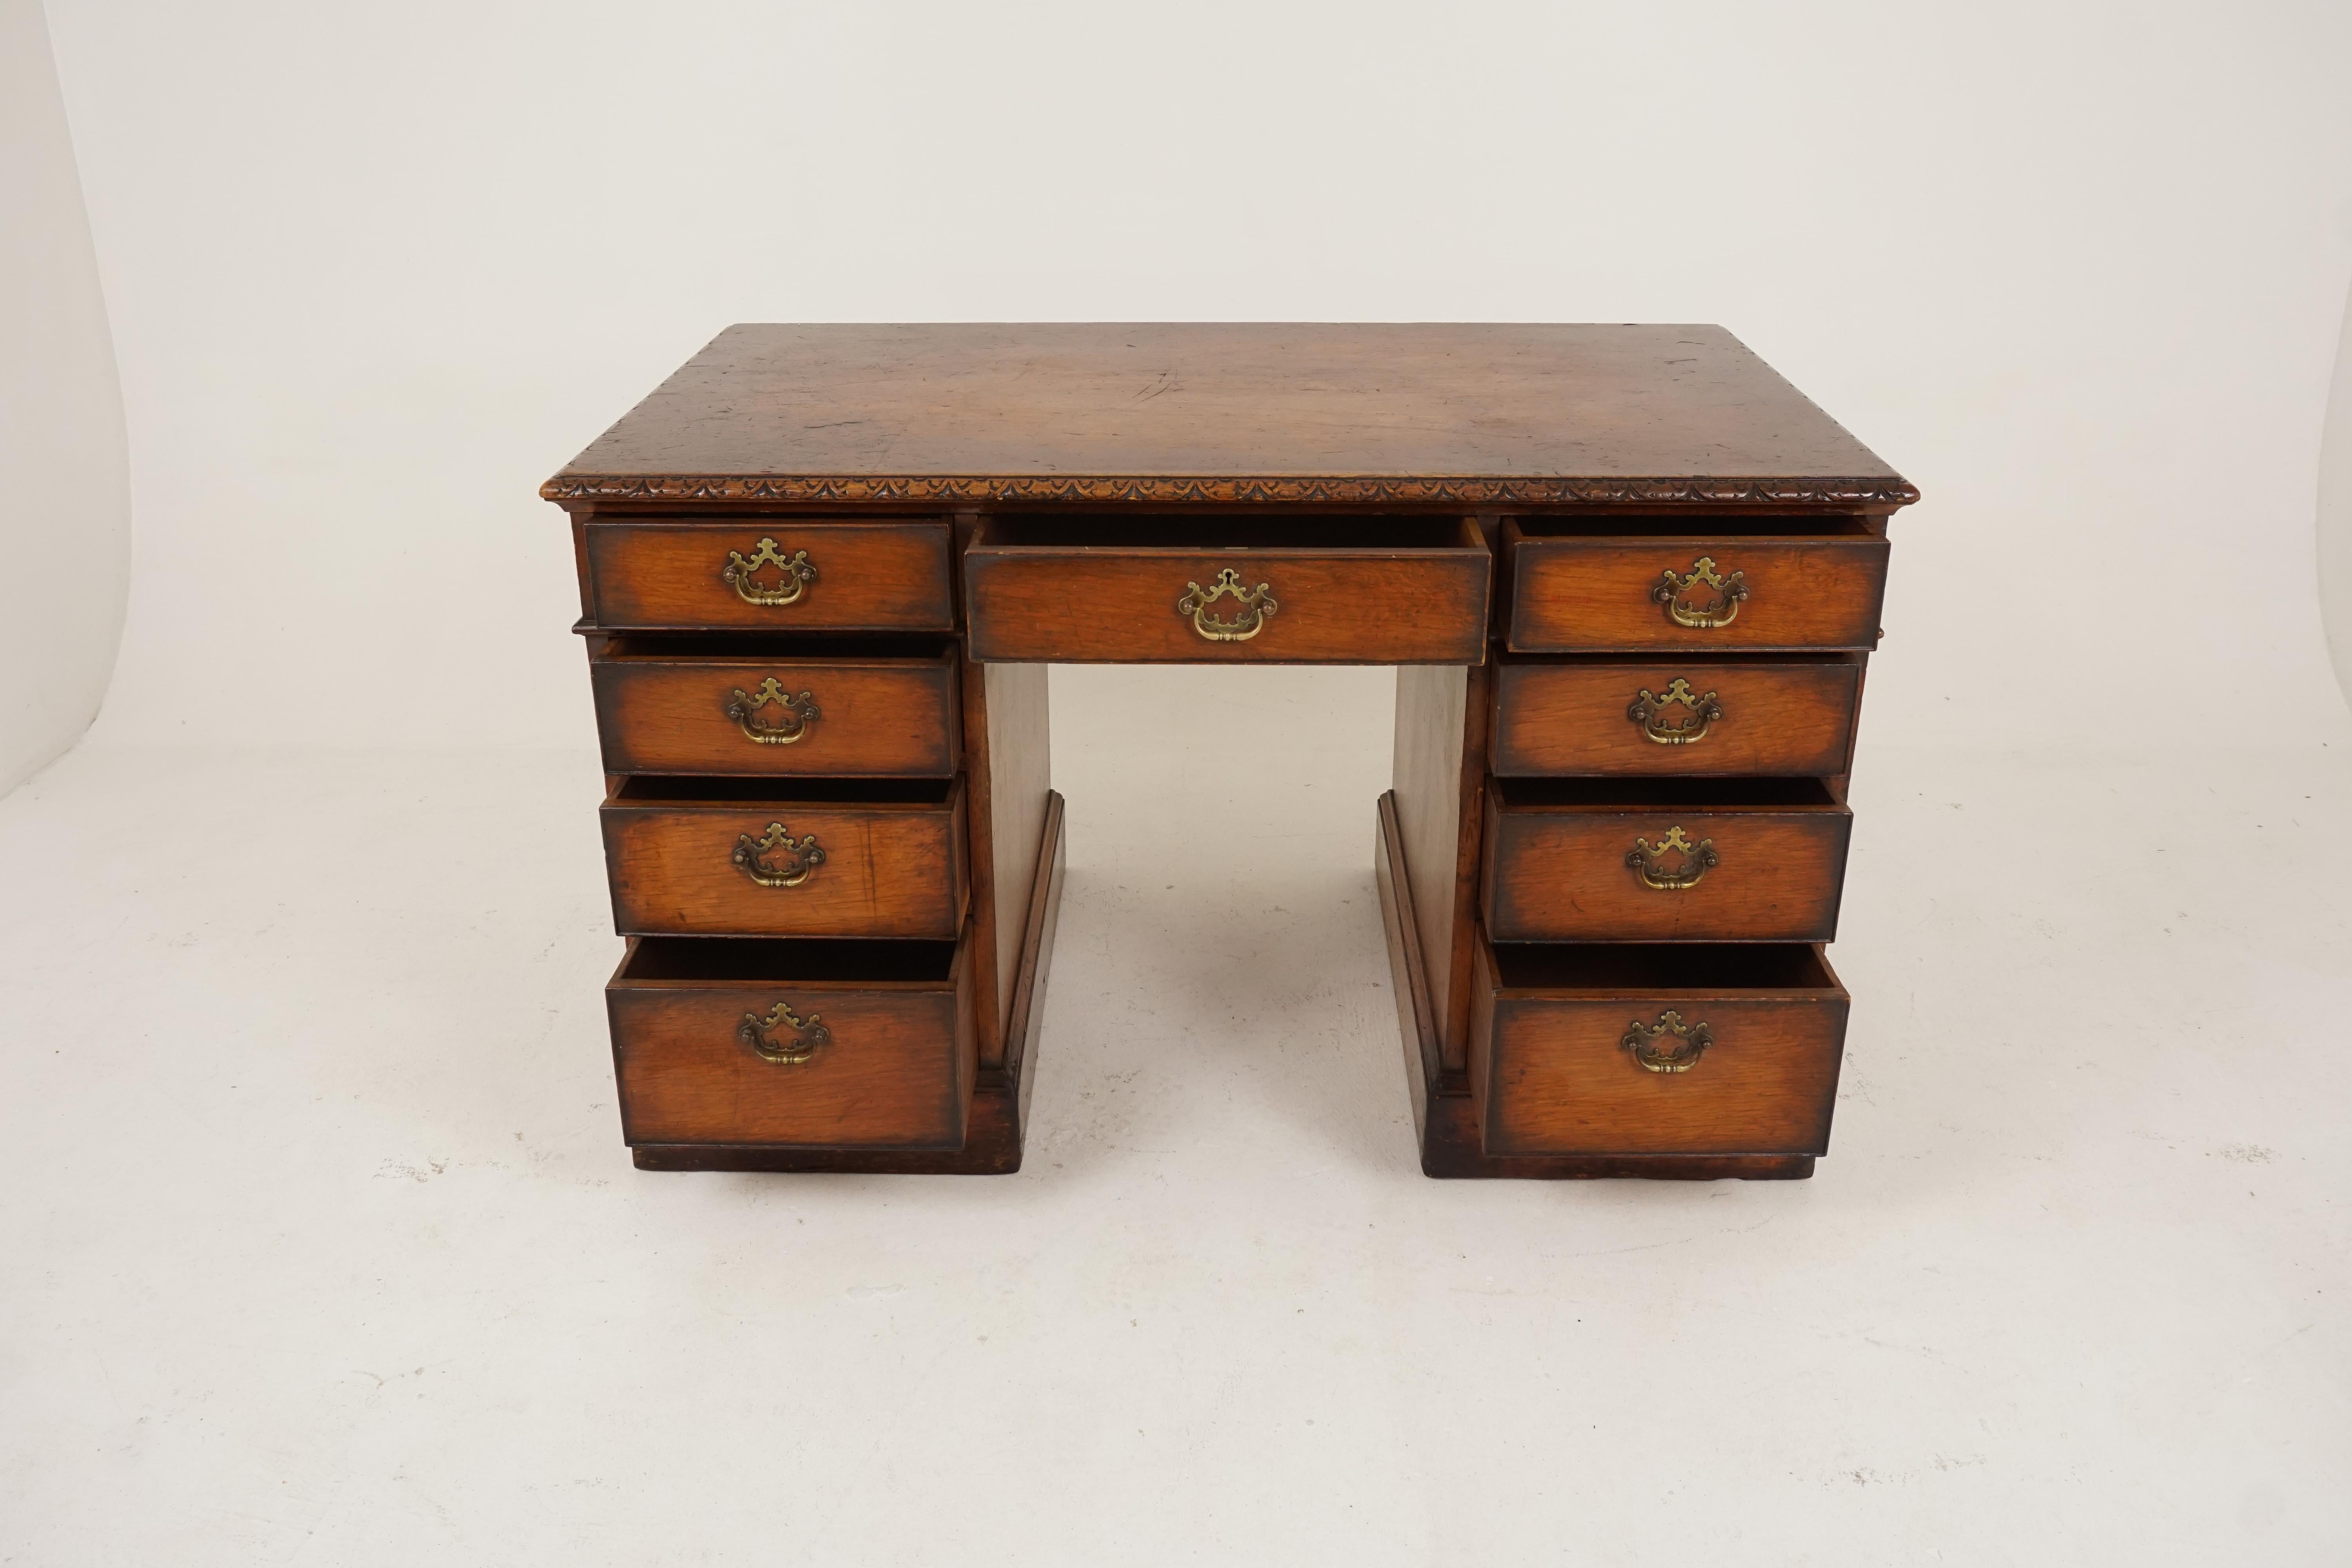 Vintage carved oak double pedestal desk, Scotland 1930, B2319

Scotland 1930
Solid oak
Original finish
Rectangular top with carved edging
Central pull-out drawer
Flanked by a pair of pedestals each having four graduating drawers
All original